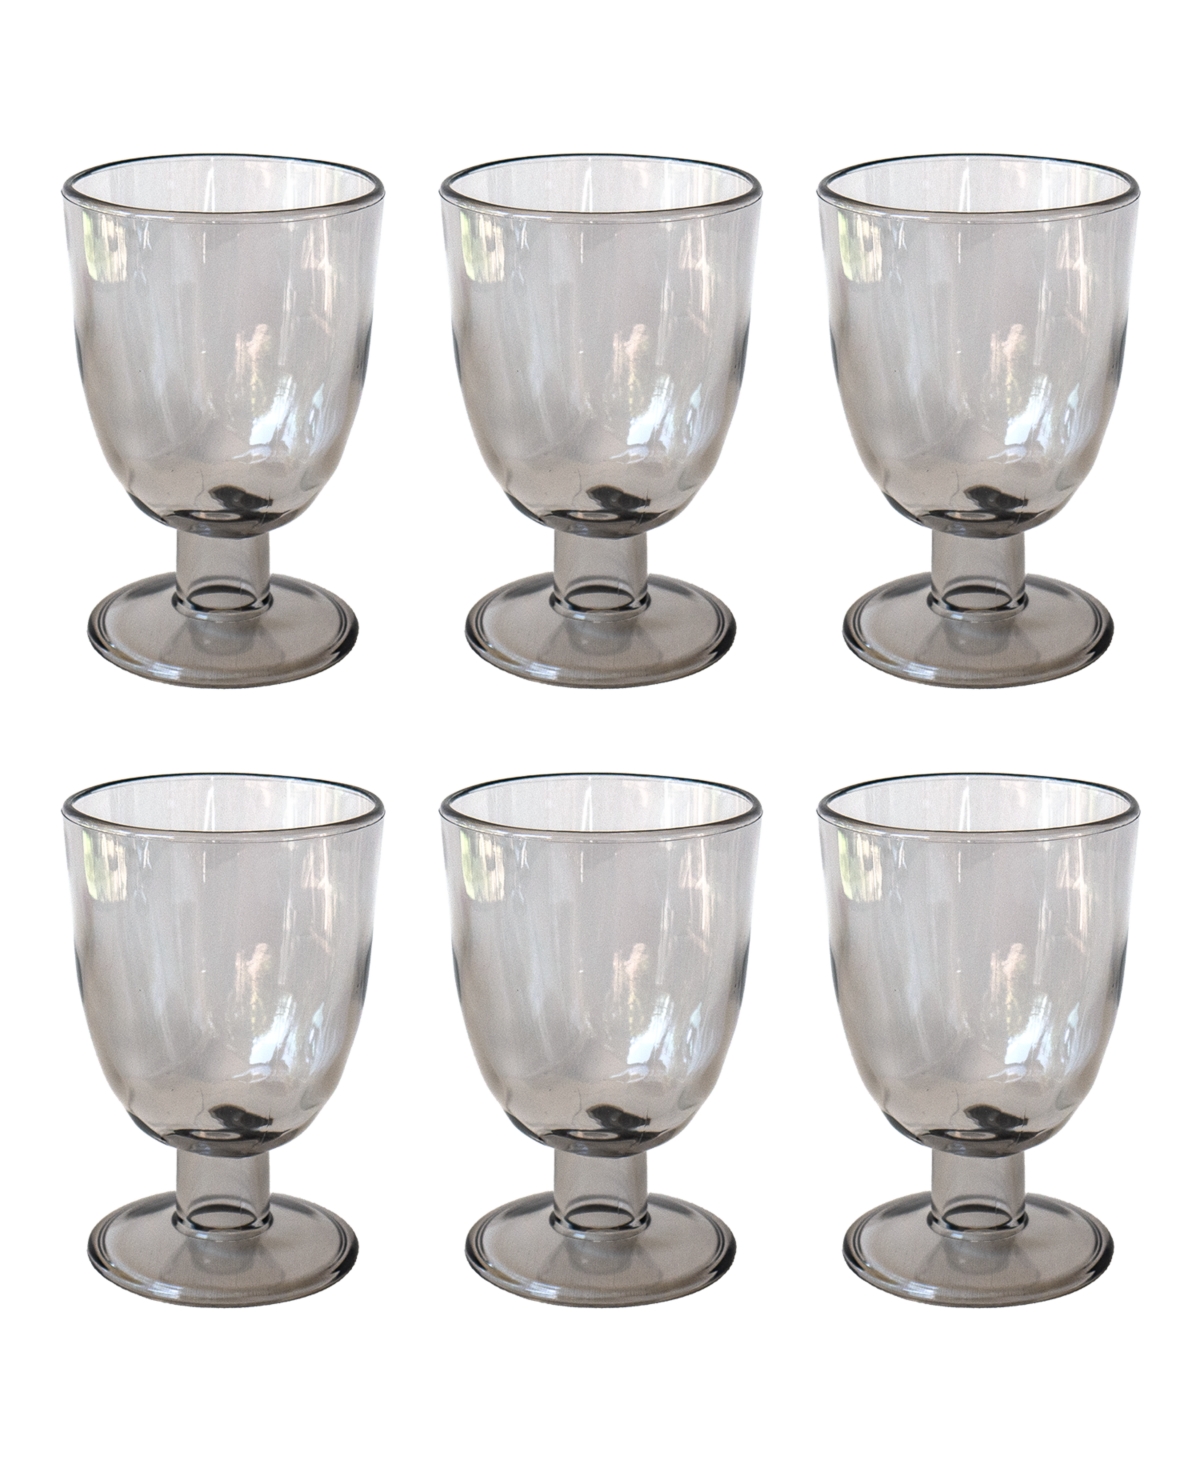 Tarhong Rustic Goblets Glasses, Set Of 6 In Gray